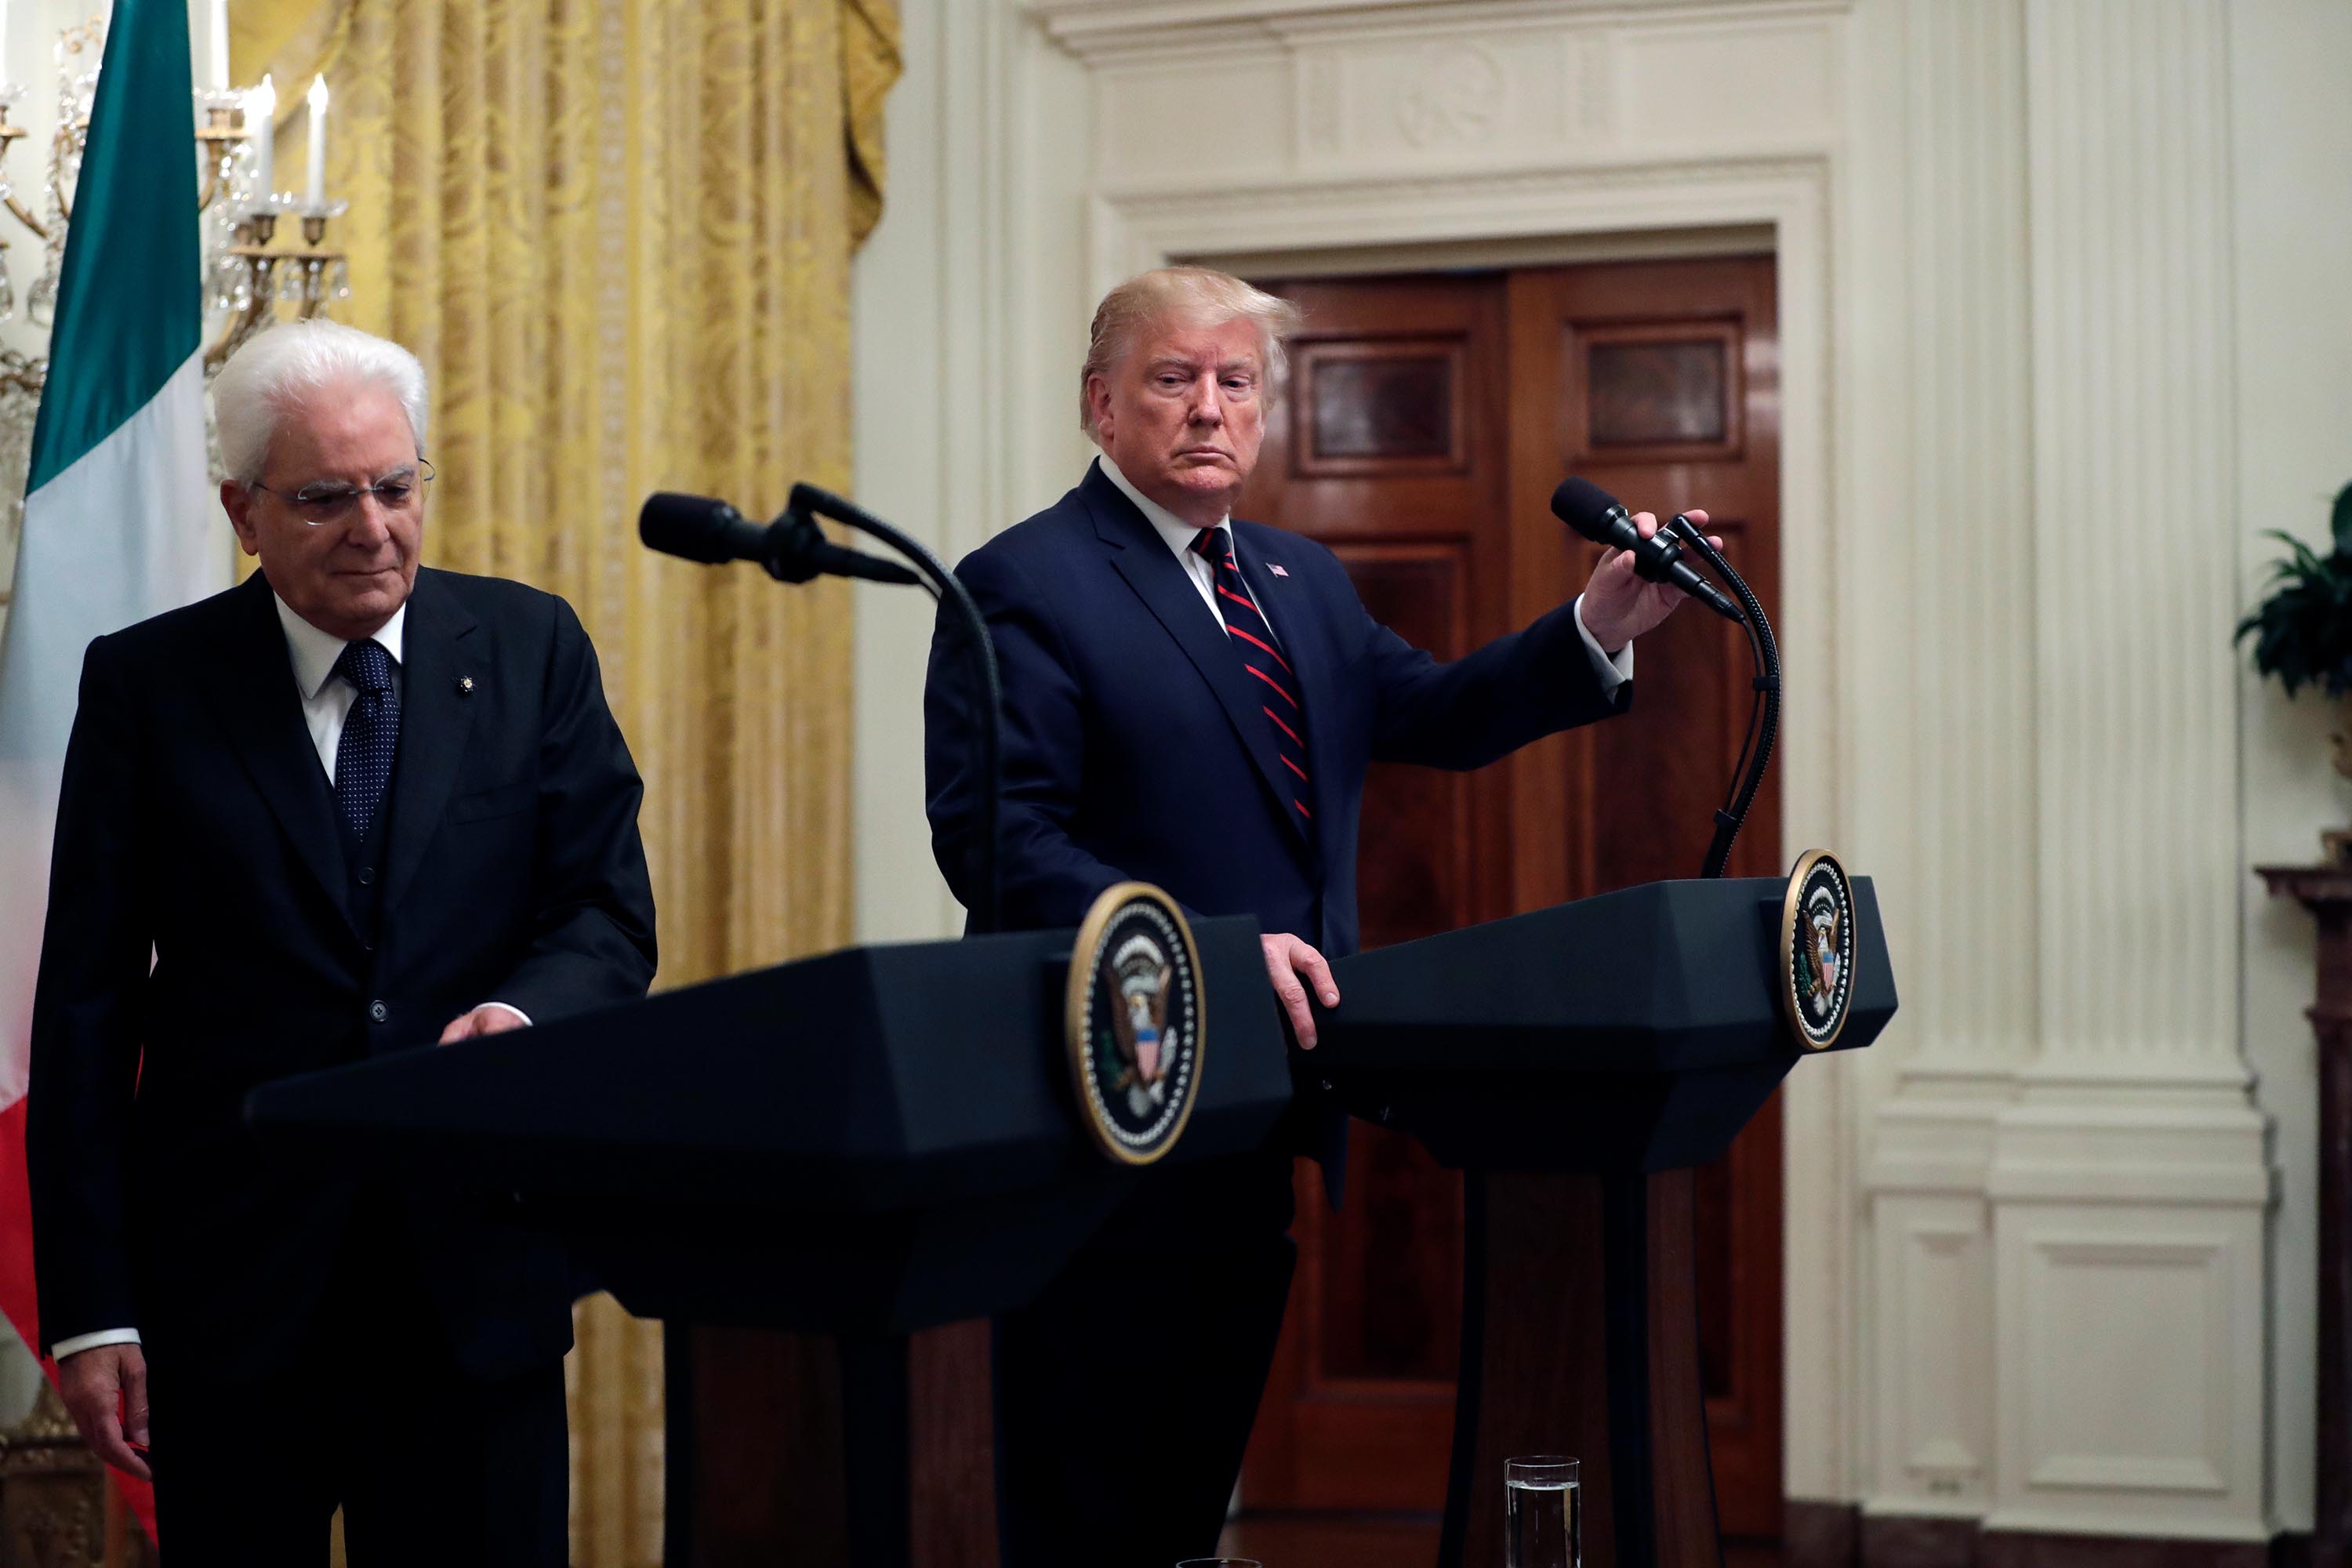 President Donald Trump arrives to a news conference with Italian President Sergio Mattarella in the East Room of the White House, Wednesday, October 16.